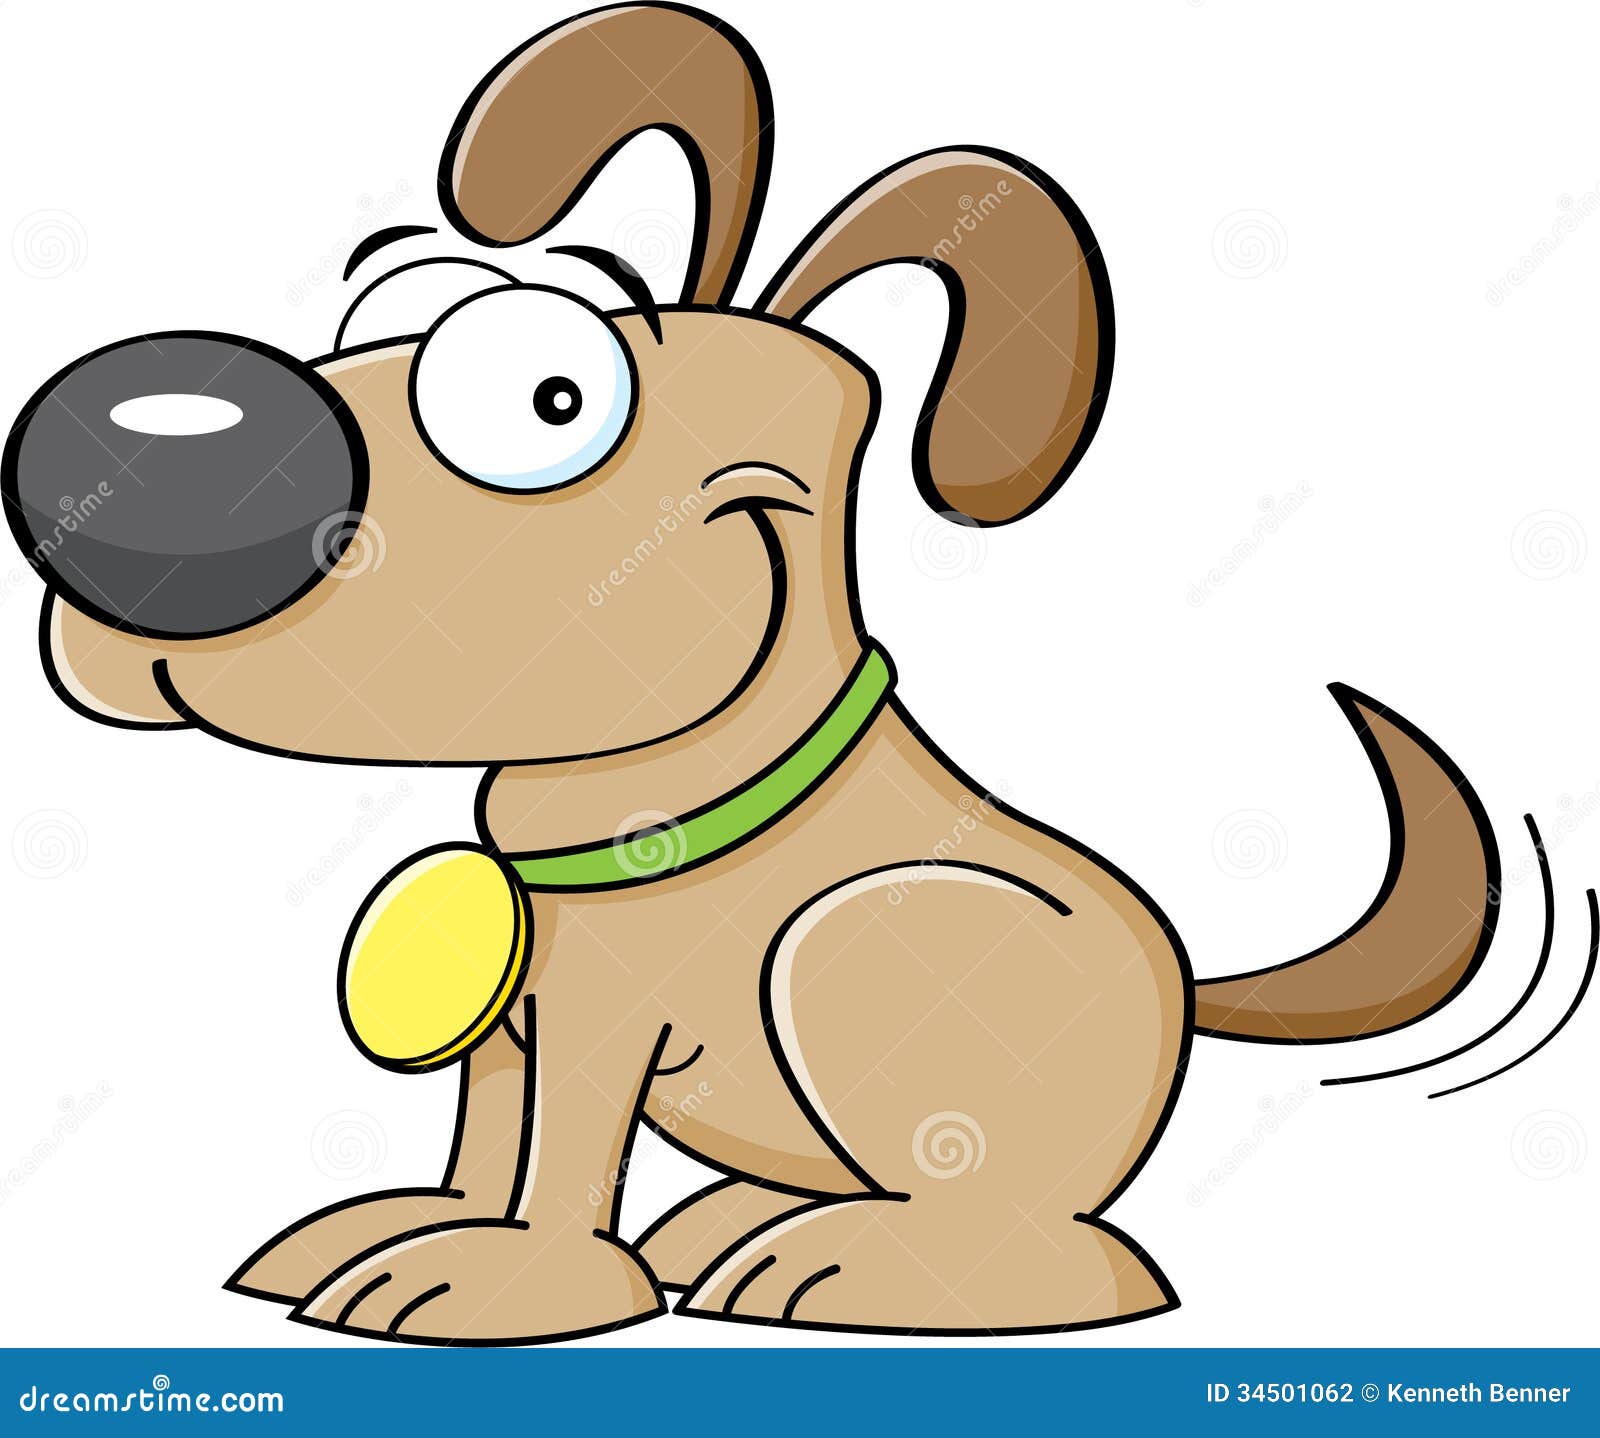 clipart dog wagging tail - photo #11